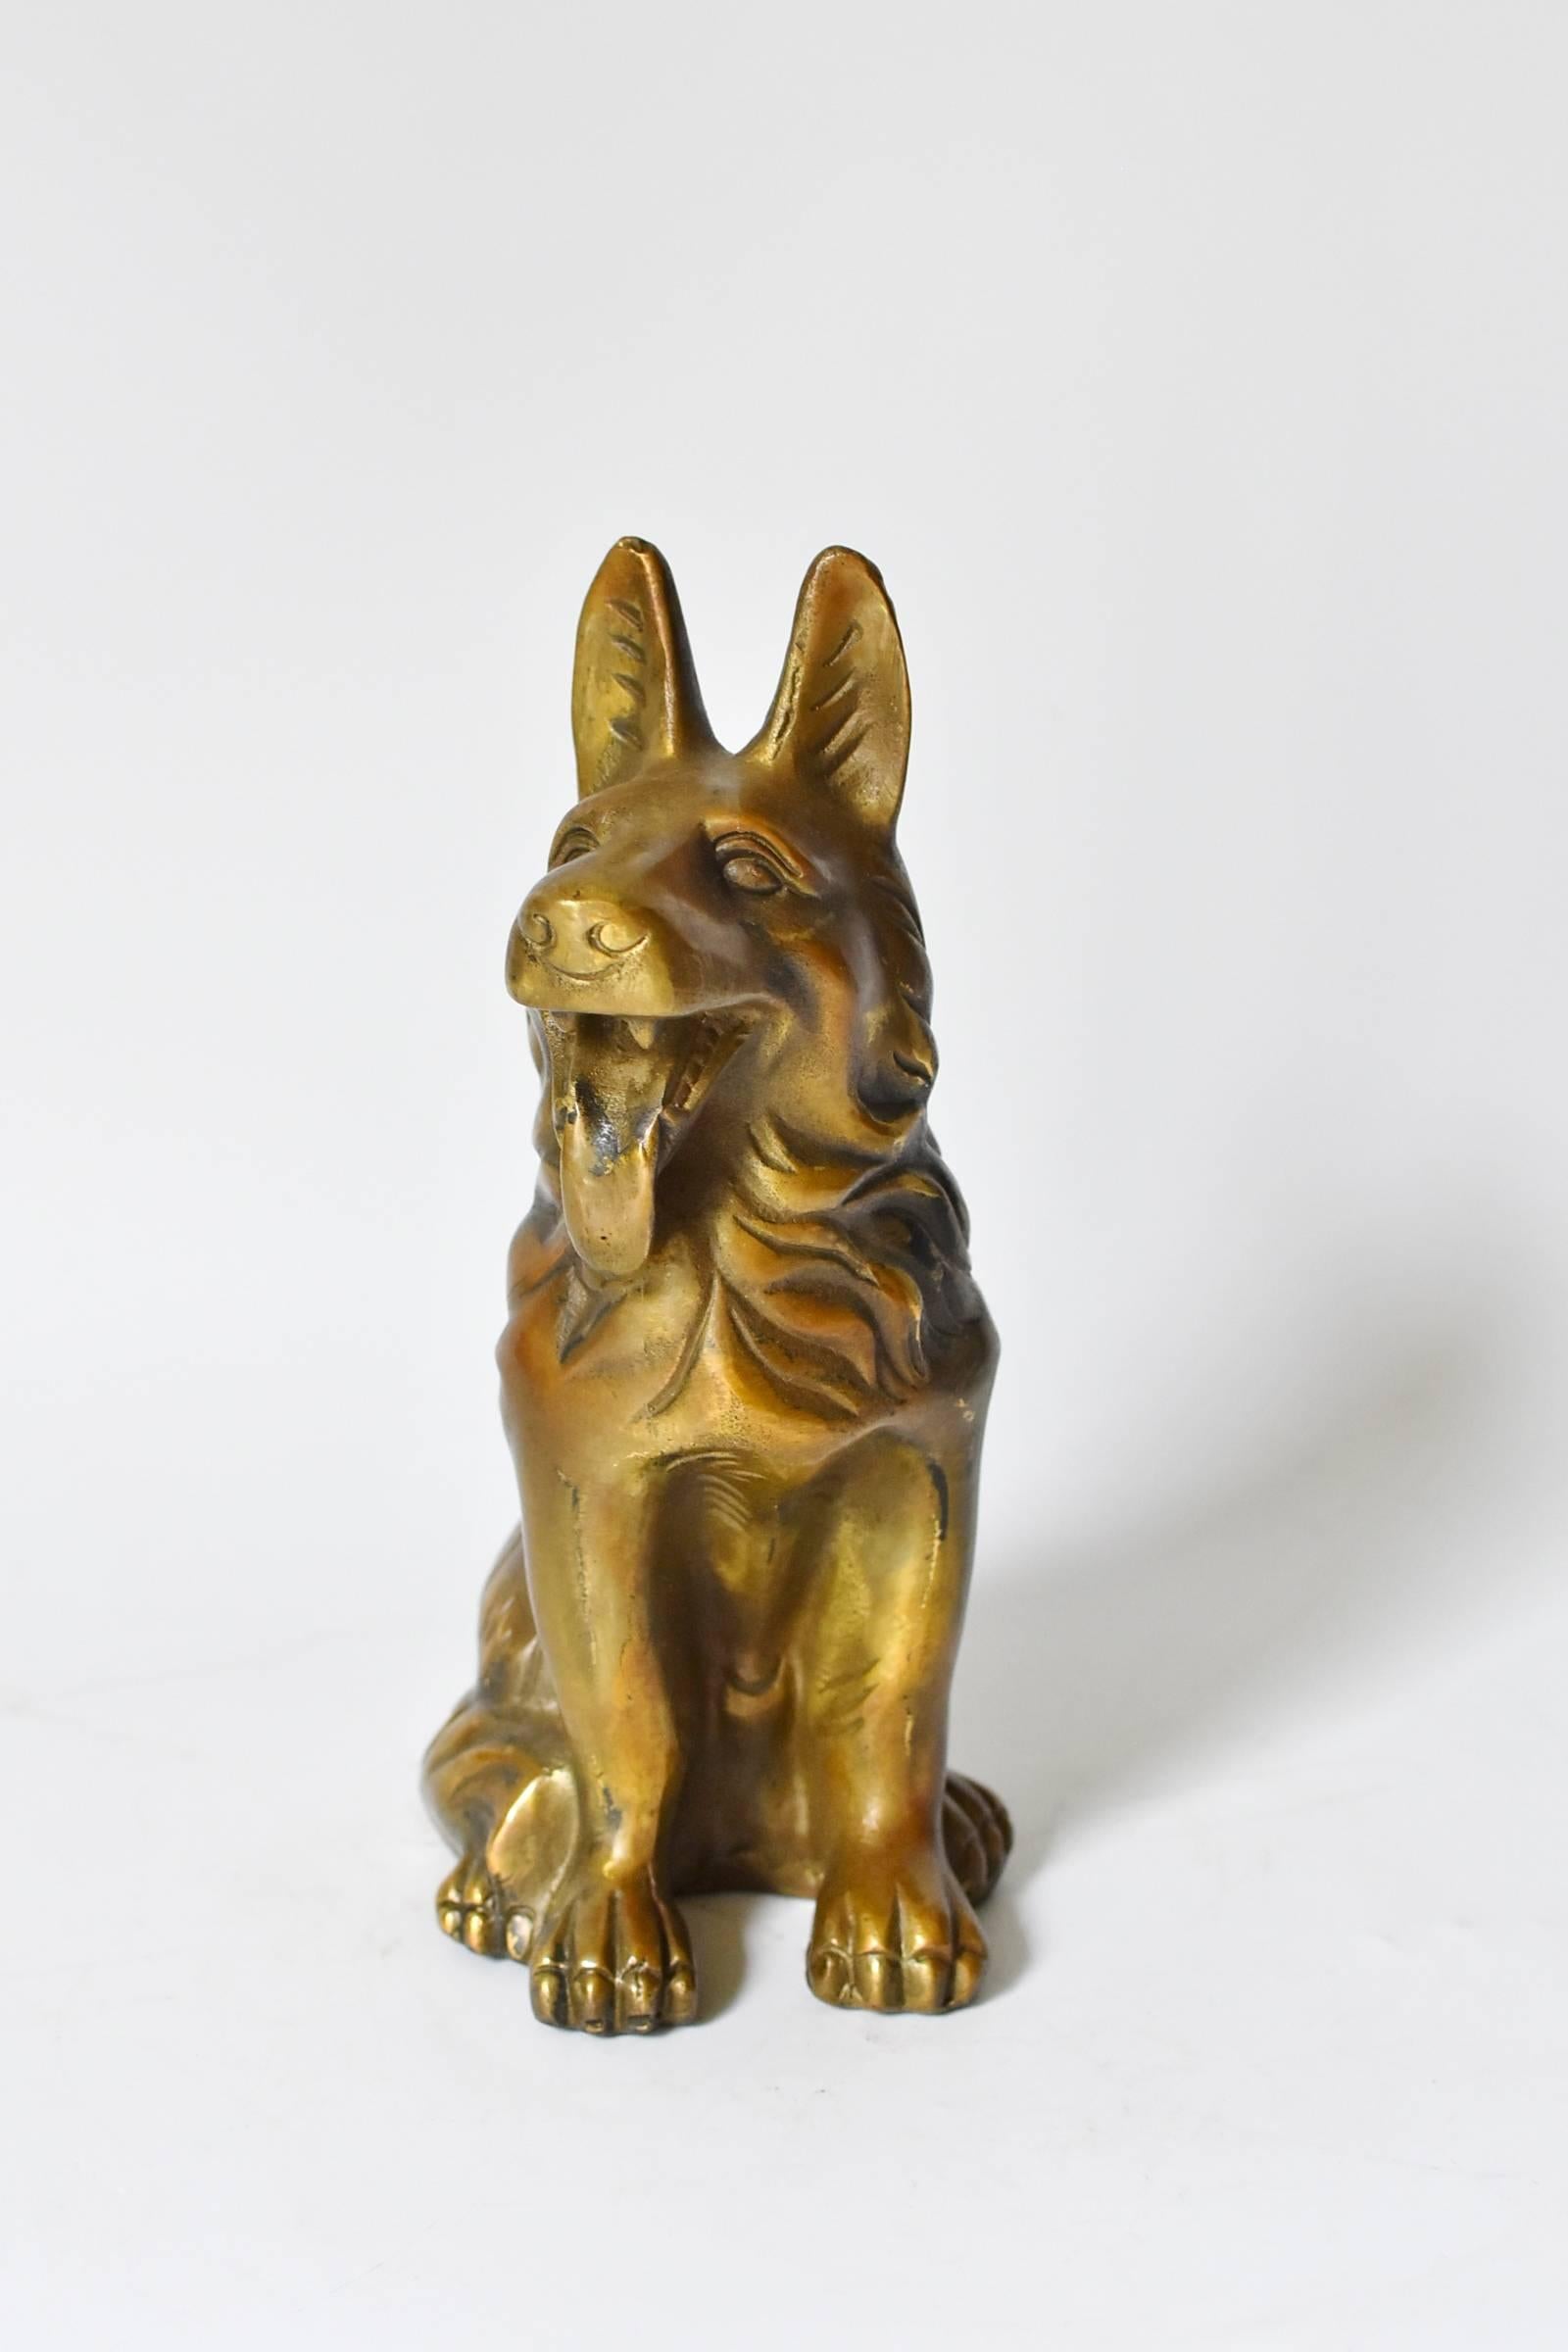 A wonderful brass dog, a German Shepherd. Vivid and expressive, with well defined facial features and hair. As a paperweight, or a sculpture, this is a fantastic piece to add to your collection.